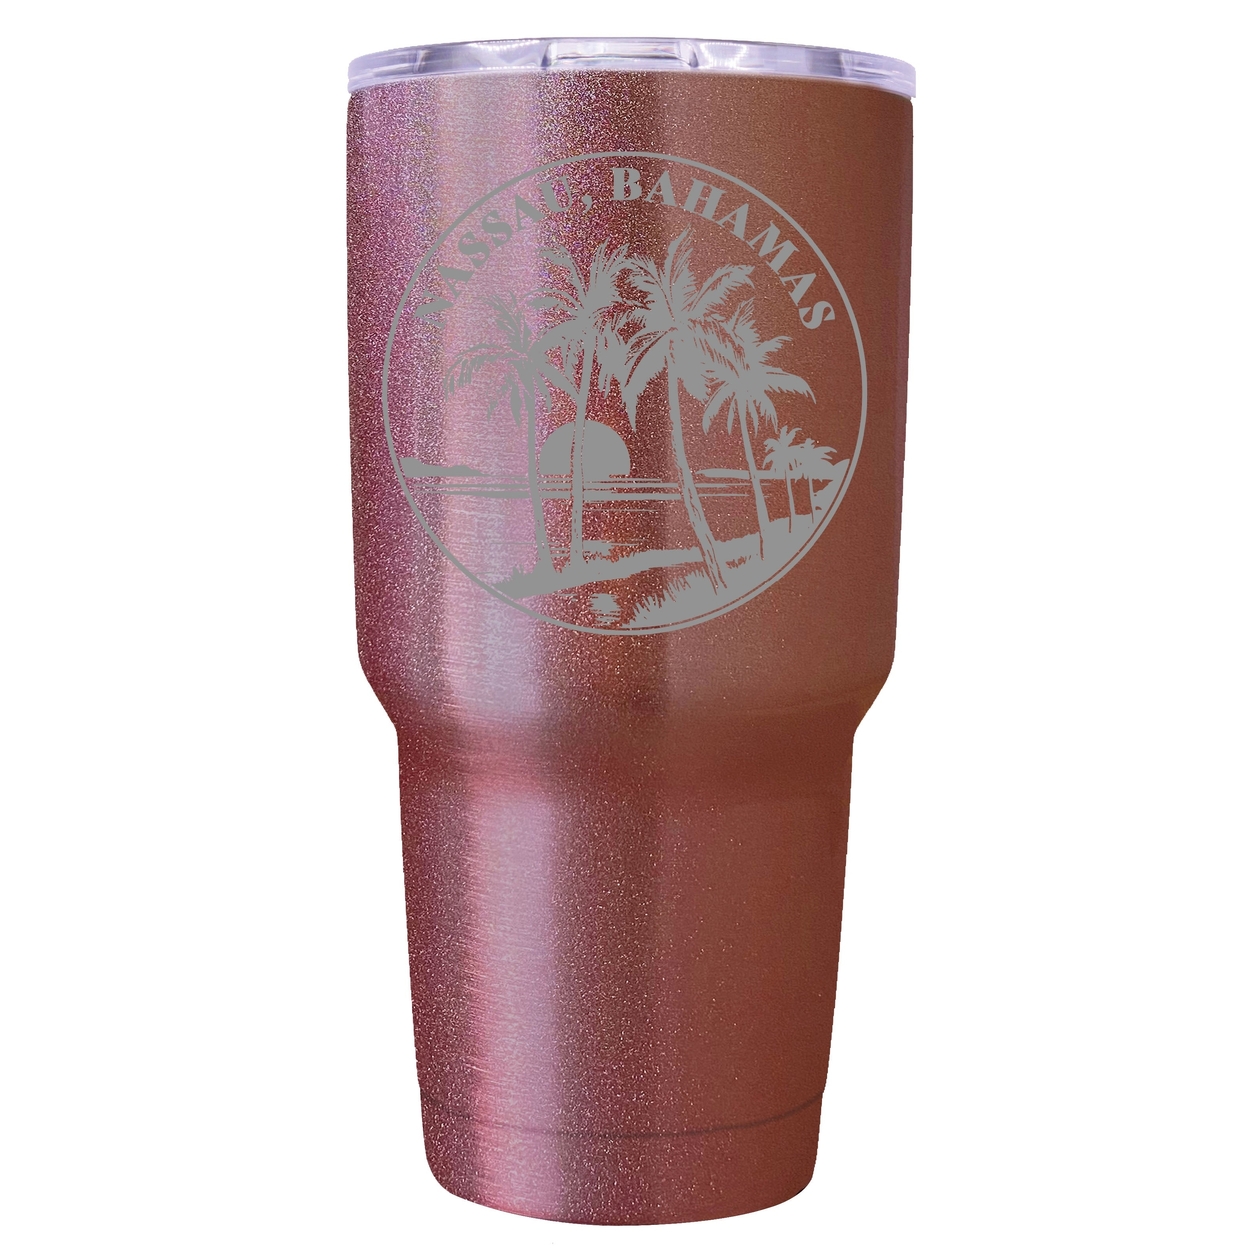 Nassau The Bahamas Souvenir 24 Oz Engraved Insulated Stainless Steel Tumbler - Navy,,4-Pack